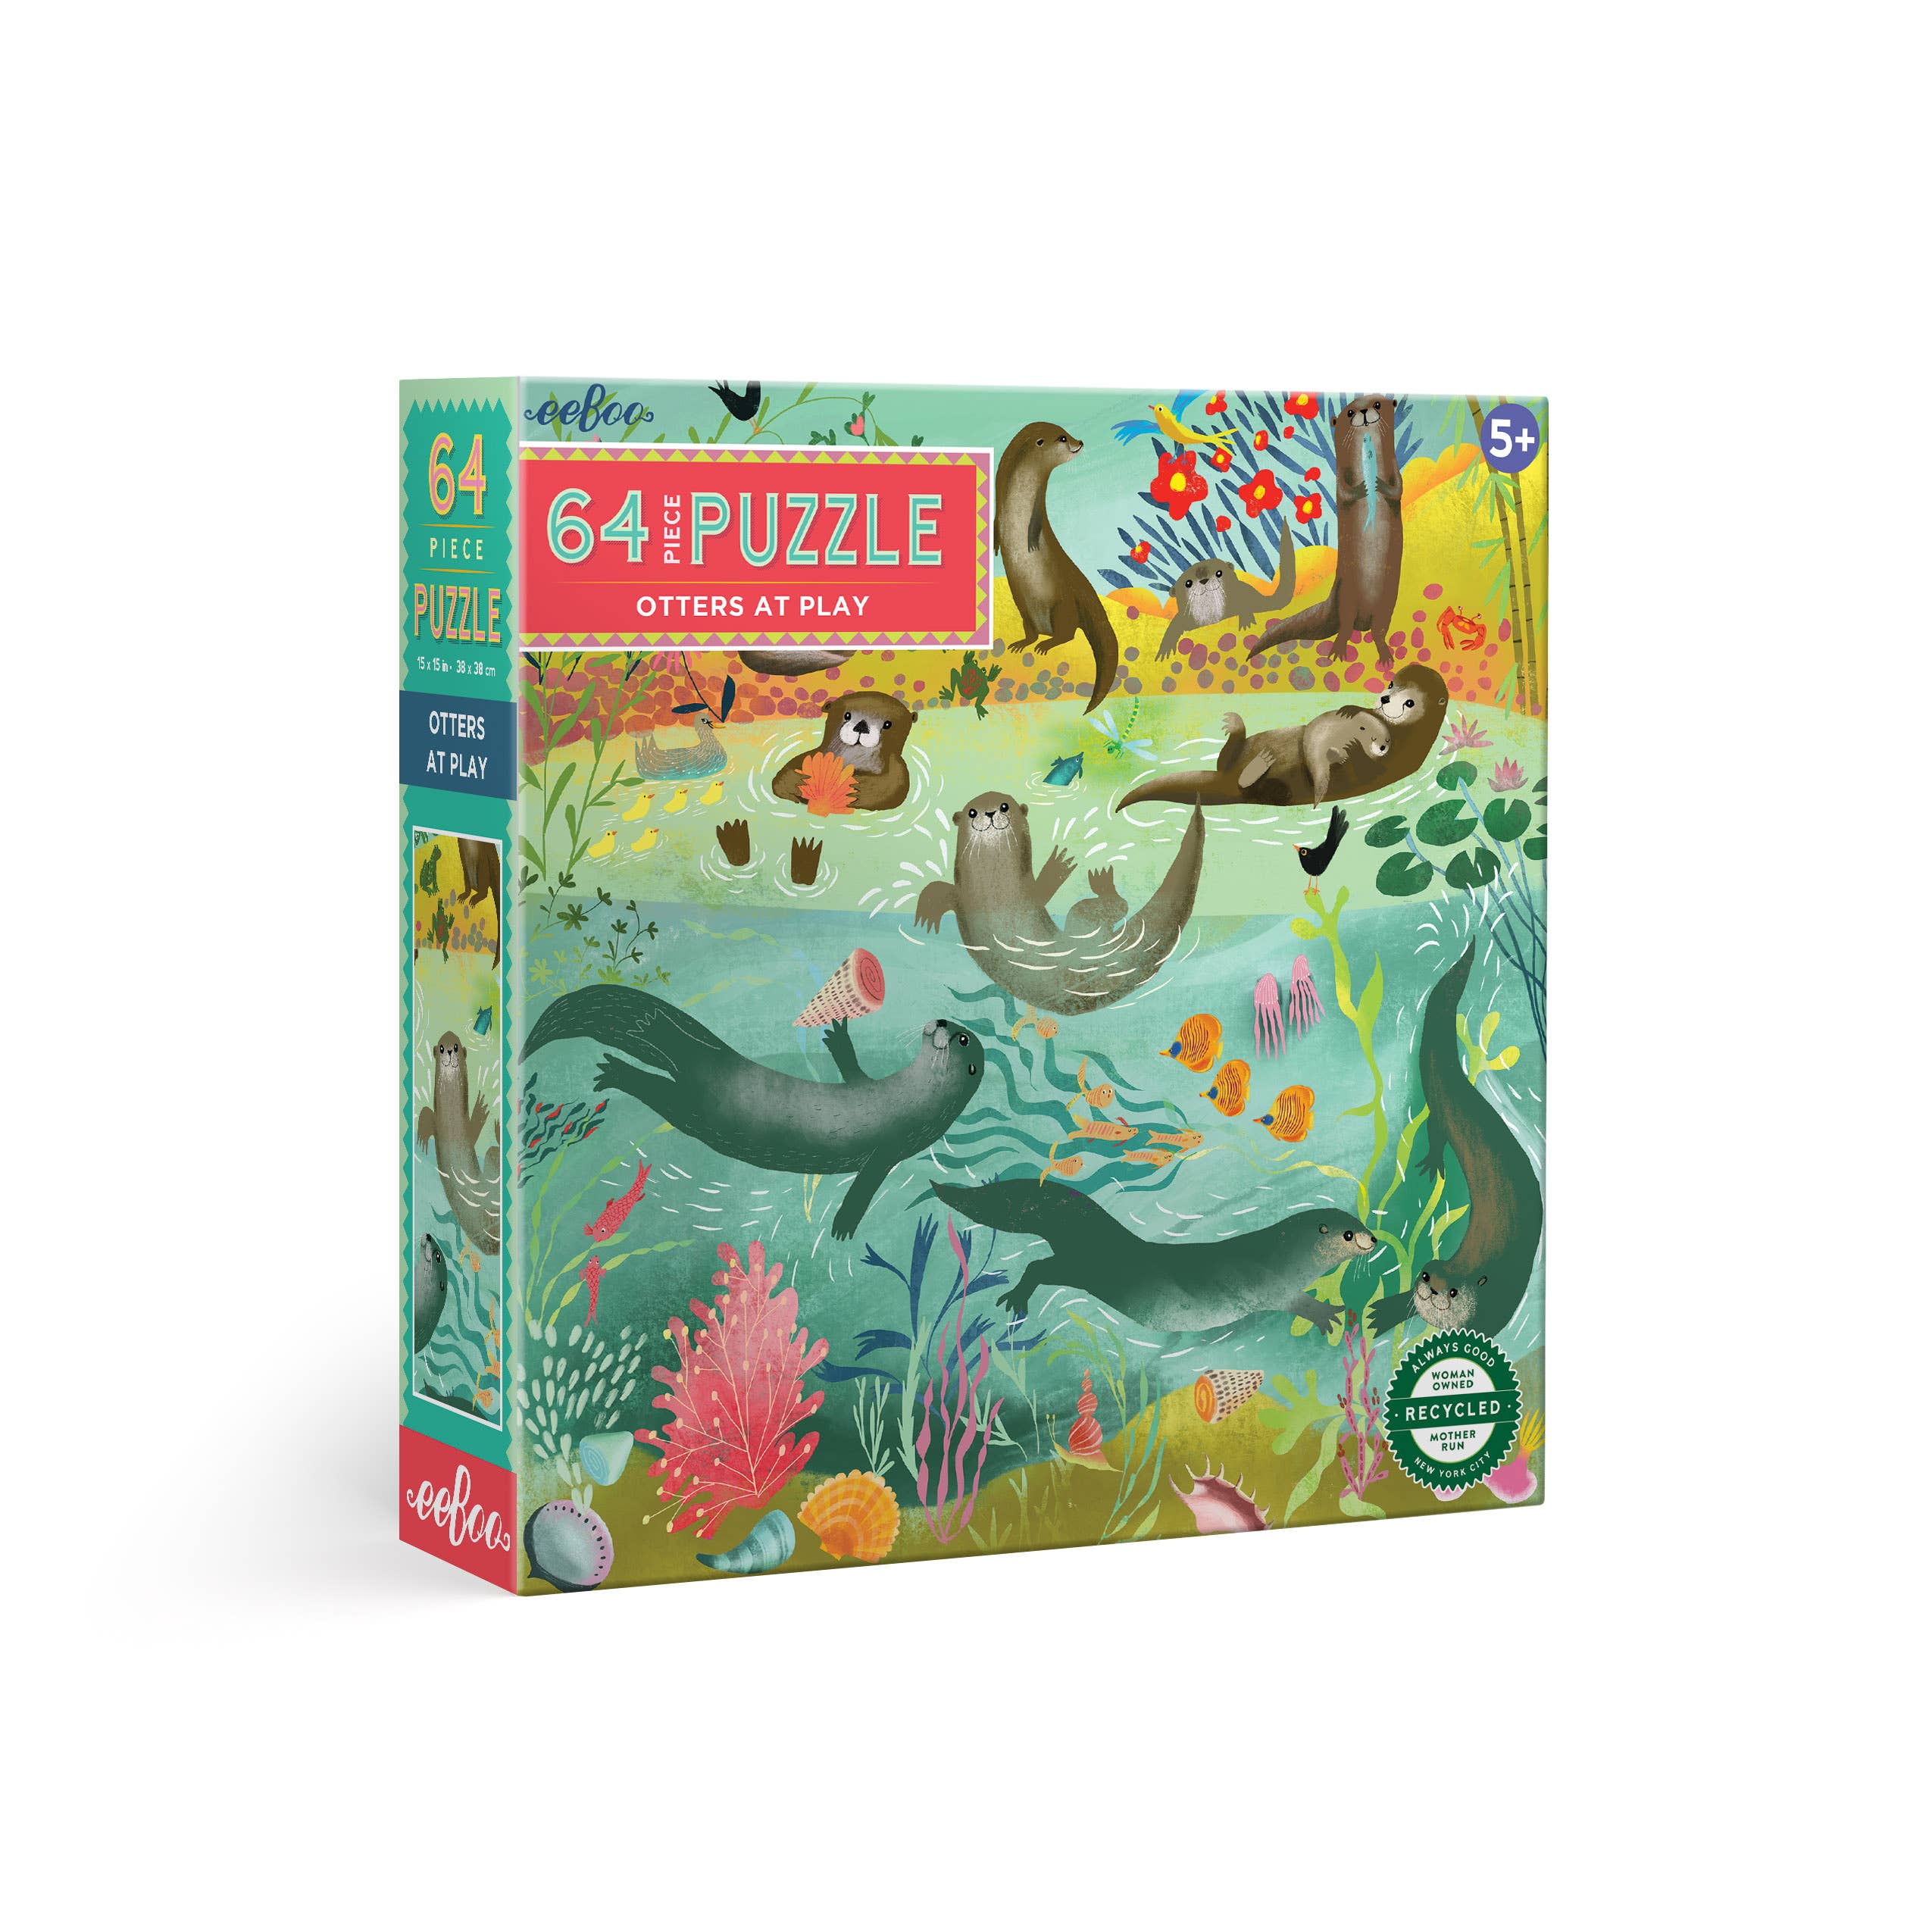 Puzzle: Otters at Play (64 Pieces)